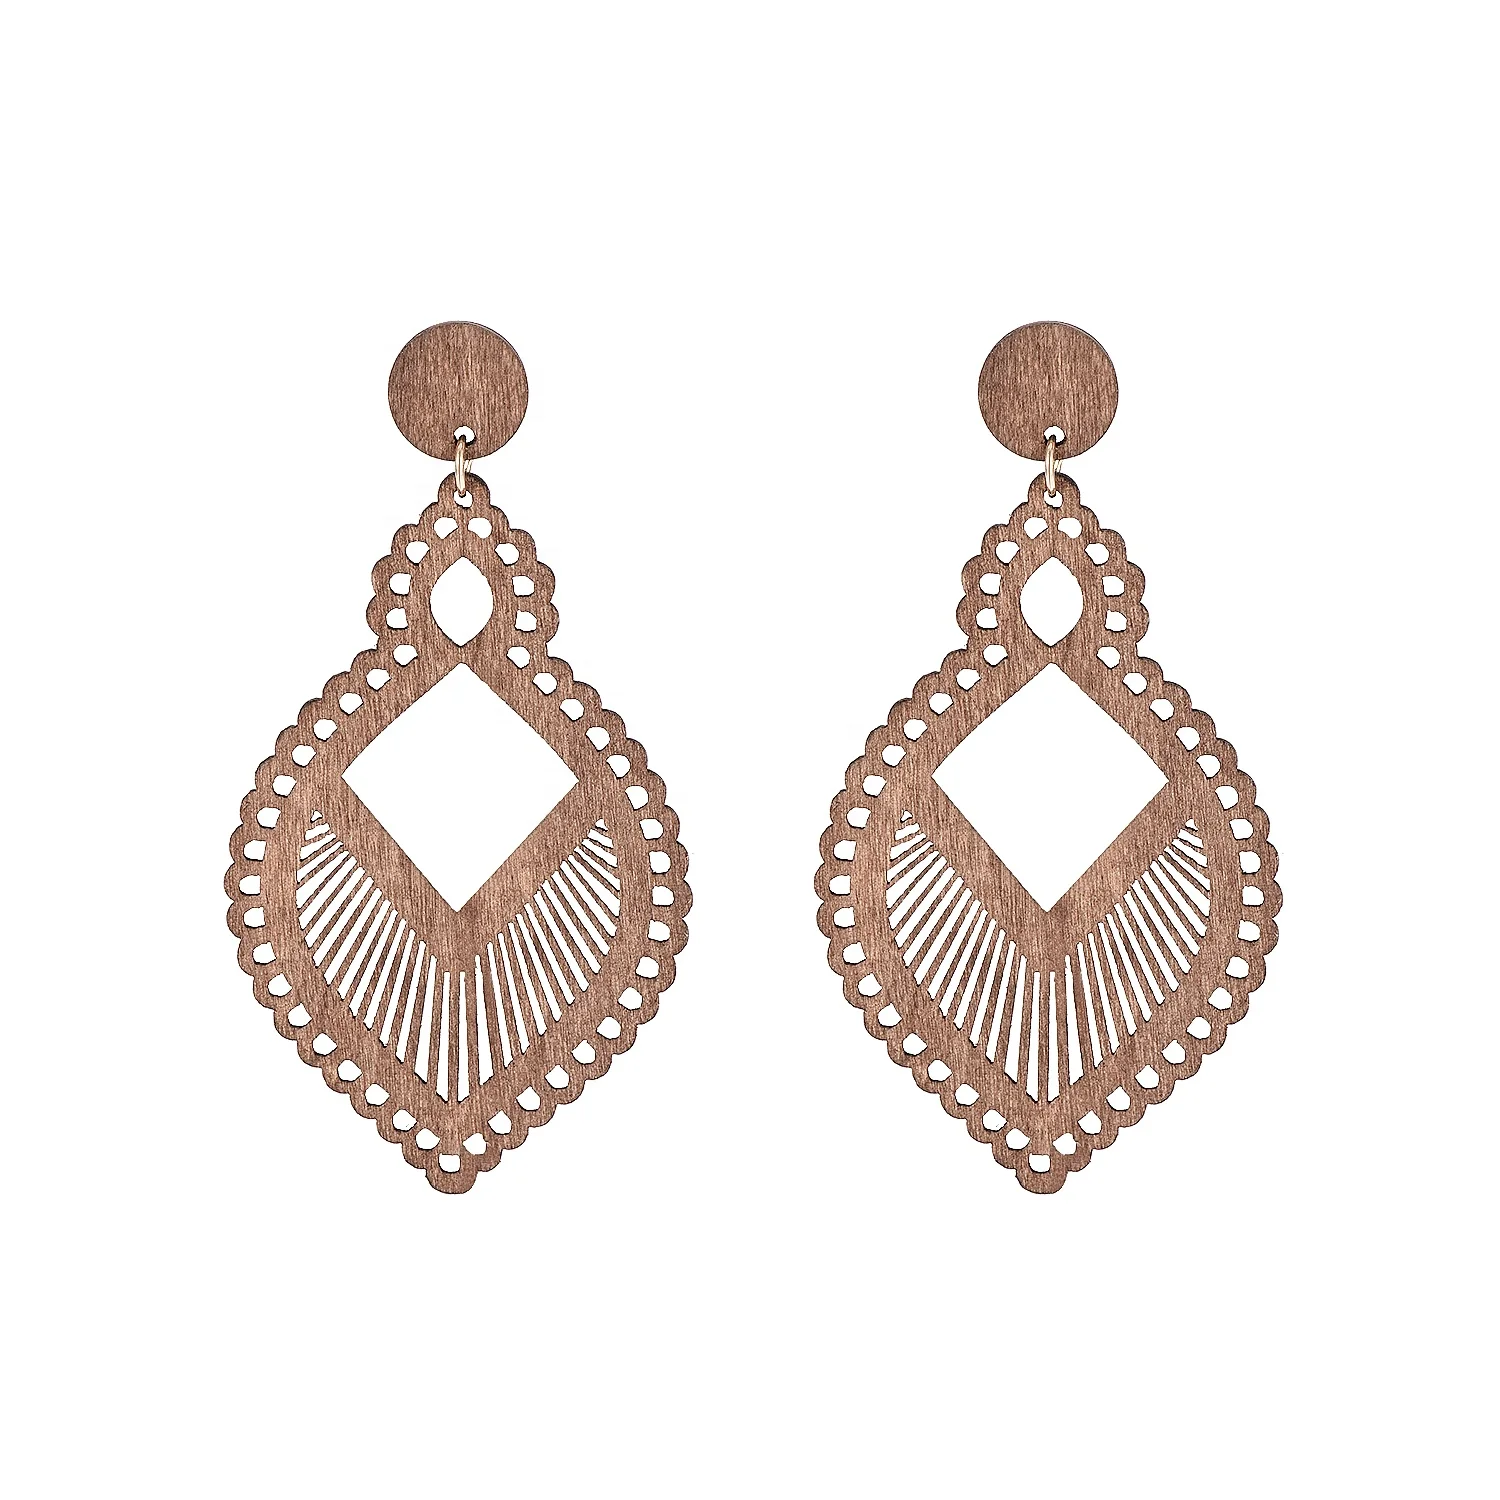 

PUSHI hot selling products 2021 Europe and America wood hollow out top drop earrings statement geometric trinkets, Picture shows